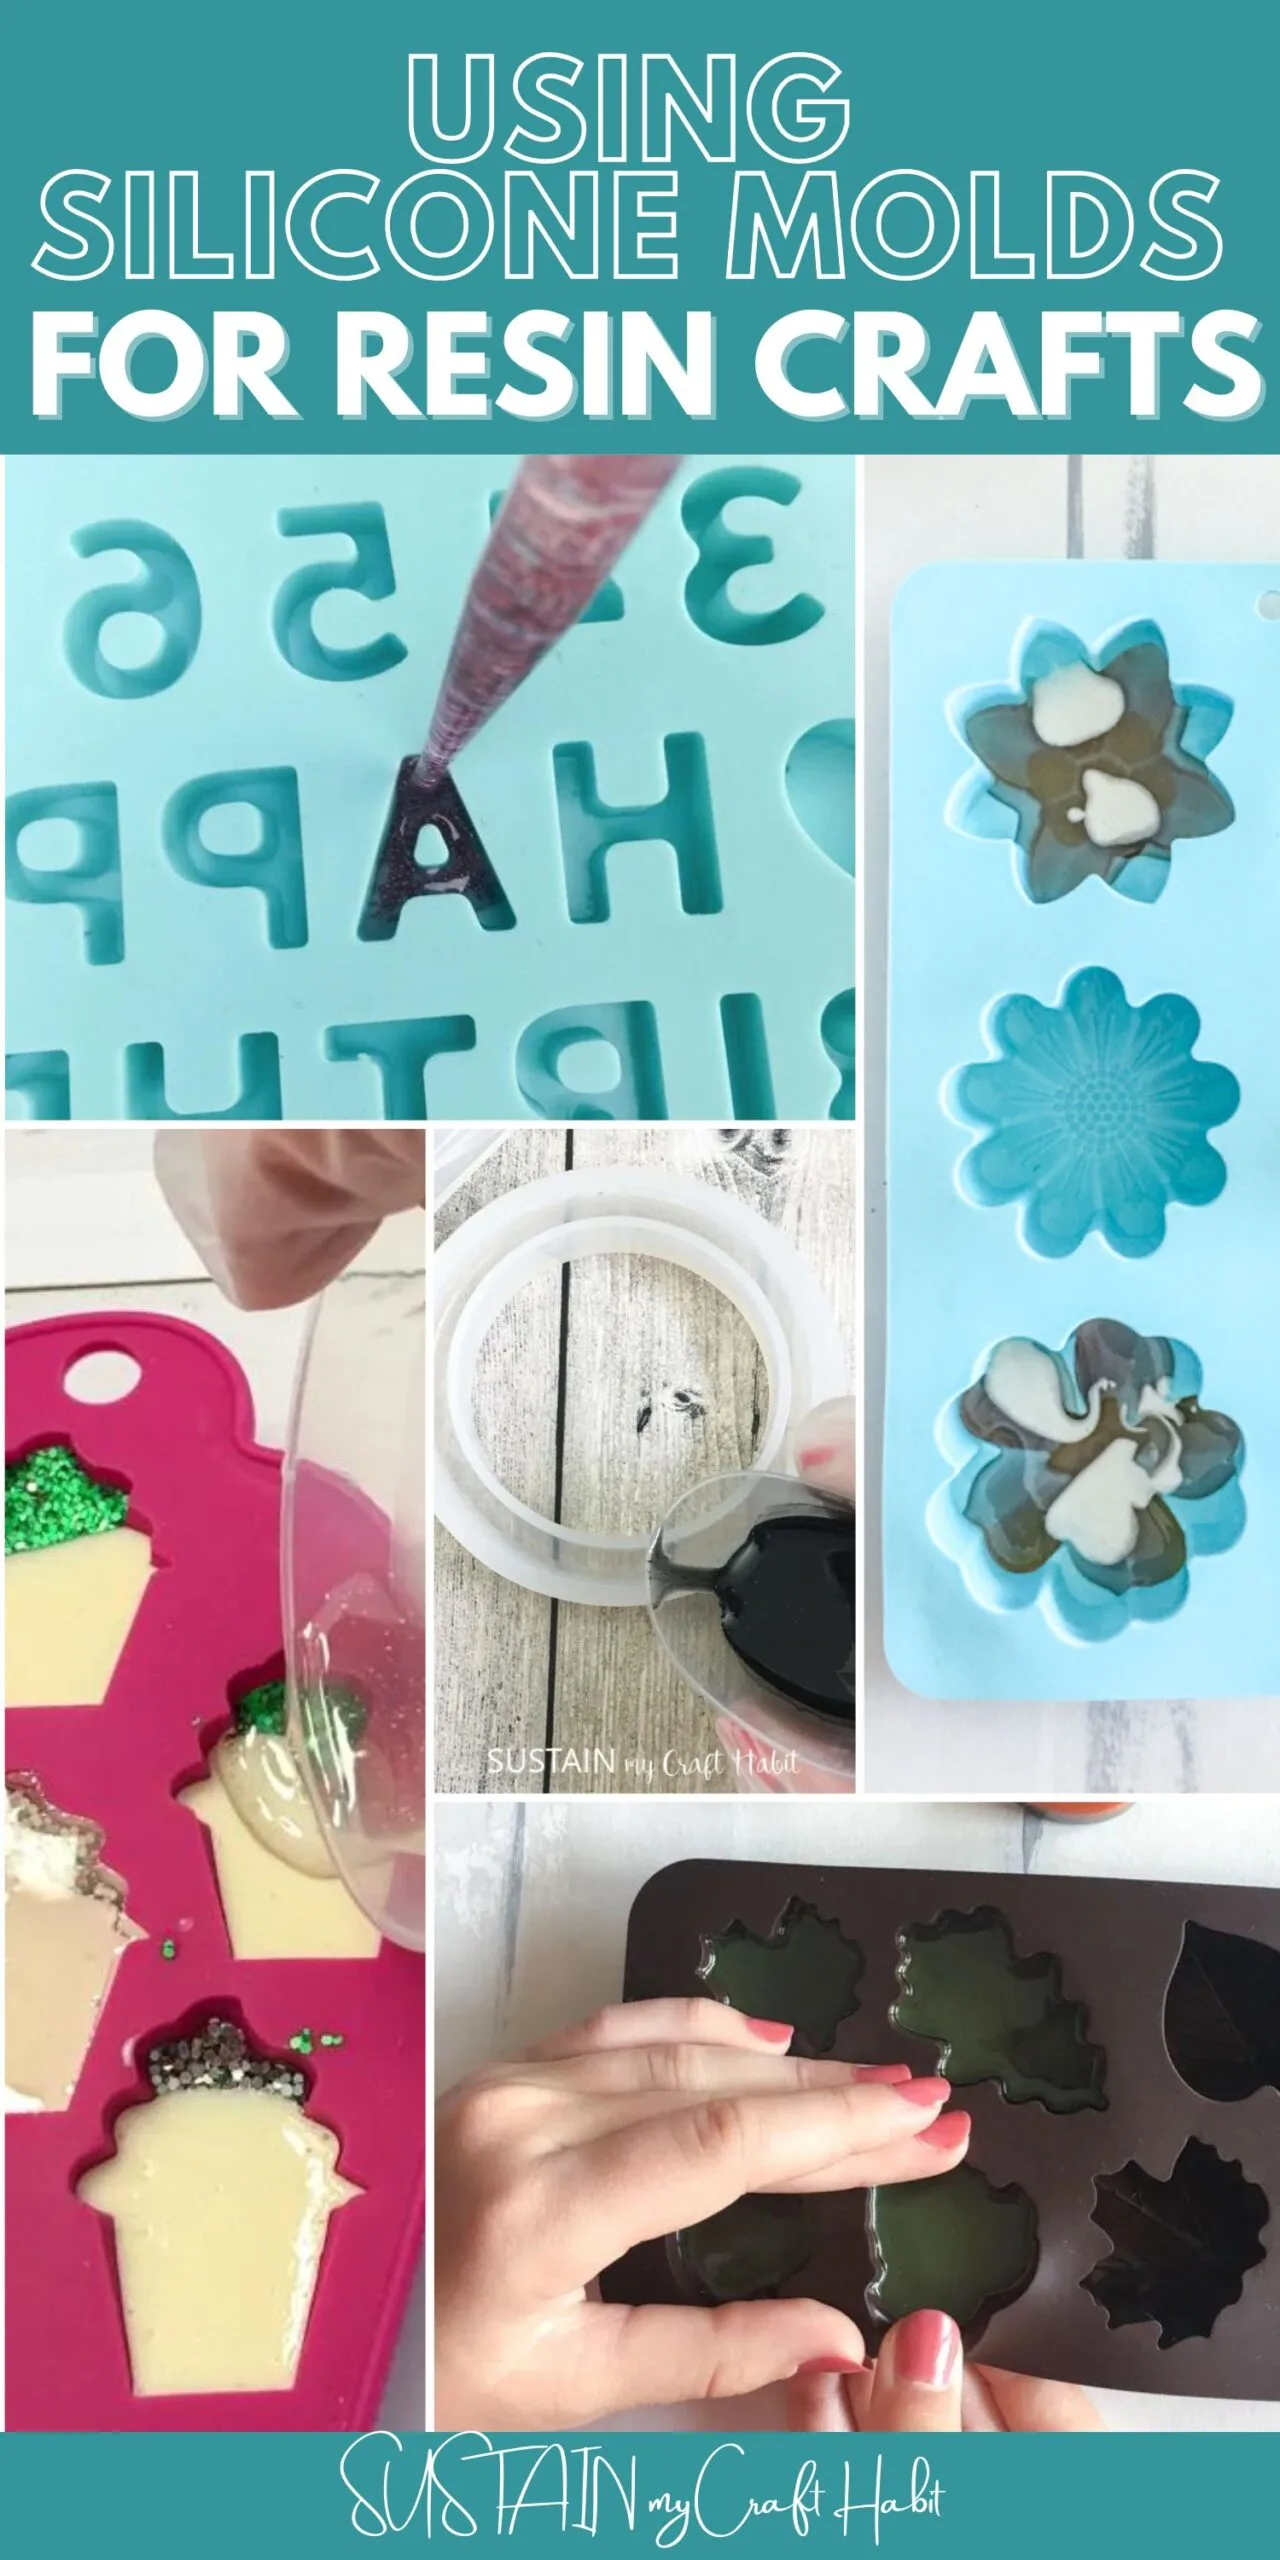 Collage of various silicone molds with resin being poured into them and text overlay reading "Using Silicone Molds for Resin Crafts".